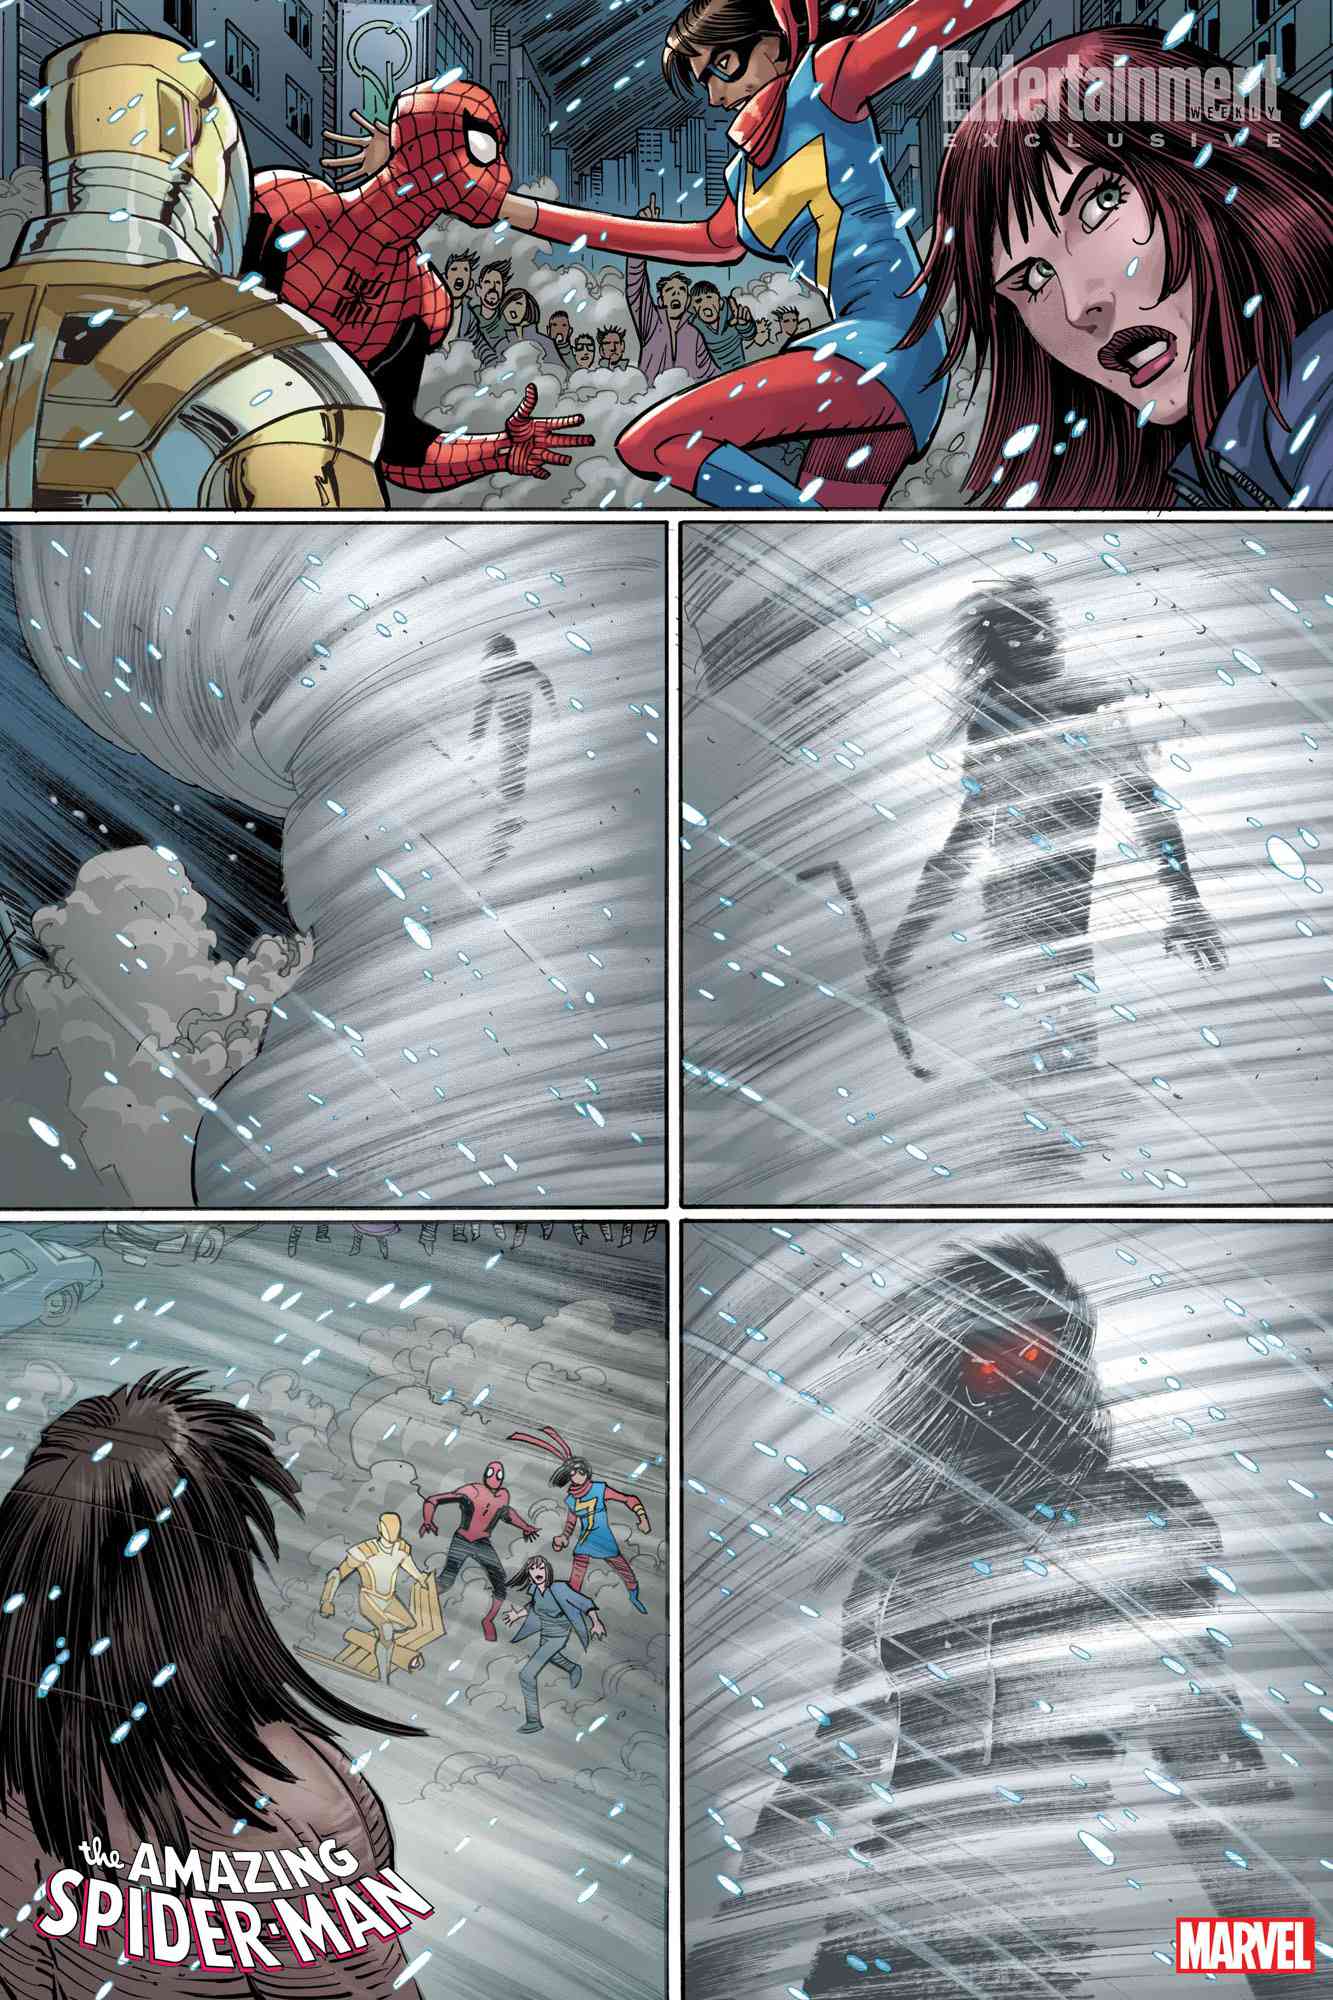 Kamala Khan faces off against the Emissary in 'Amazing Spider-Man' #26